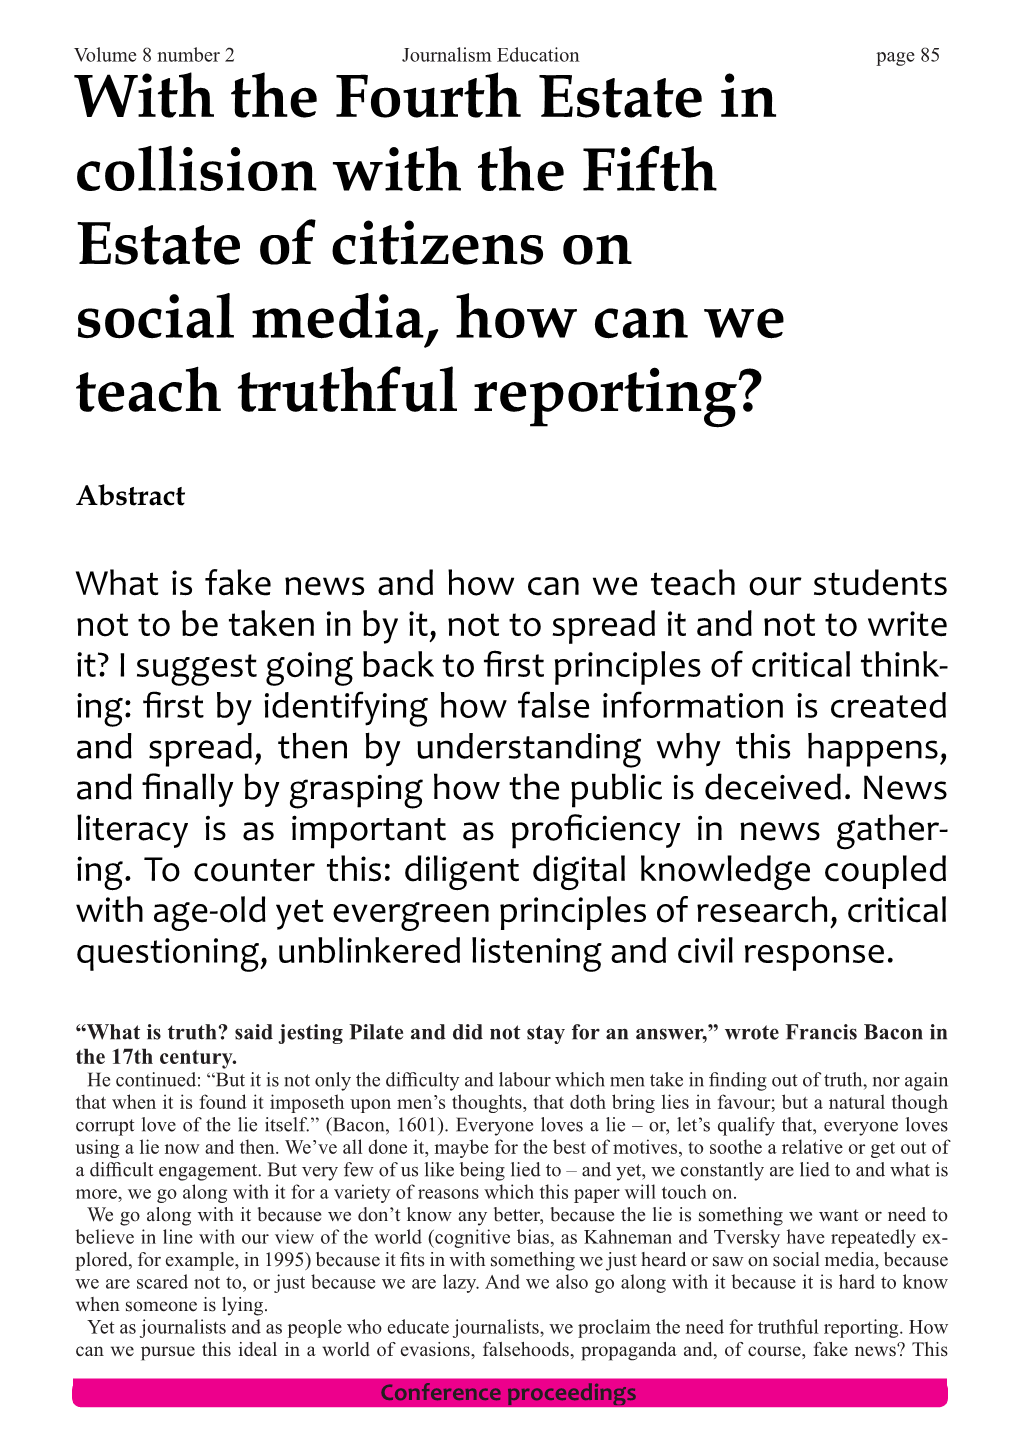 With the Fourth Estate in Collision with the Fifth Estate of Citizens on Social Media, How Can We Teach Truthful Reporting?